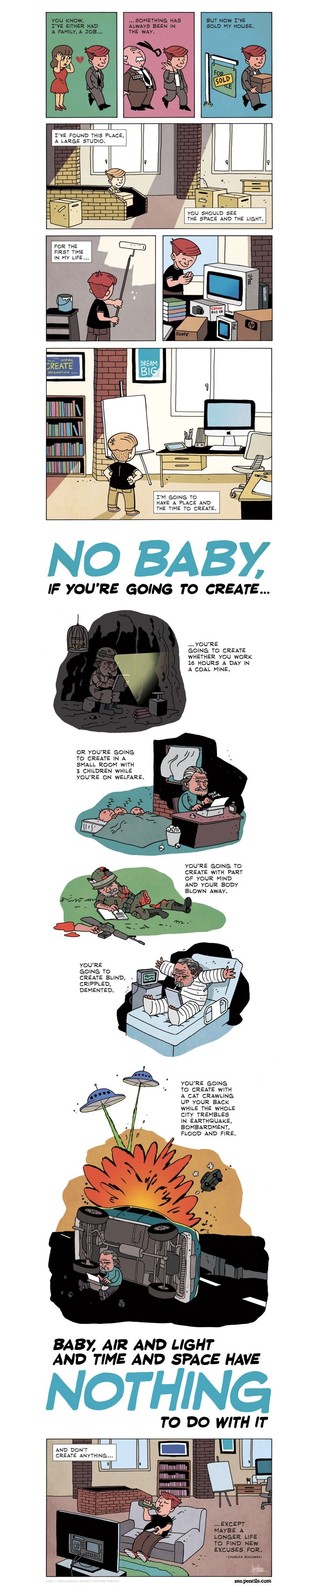 Text by Charles Bukowski, "air and light and time and space" (1992). Illustrations by Gavin Aung Than of Zen Pencils.